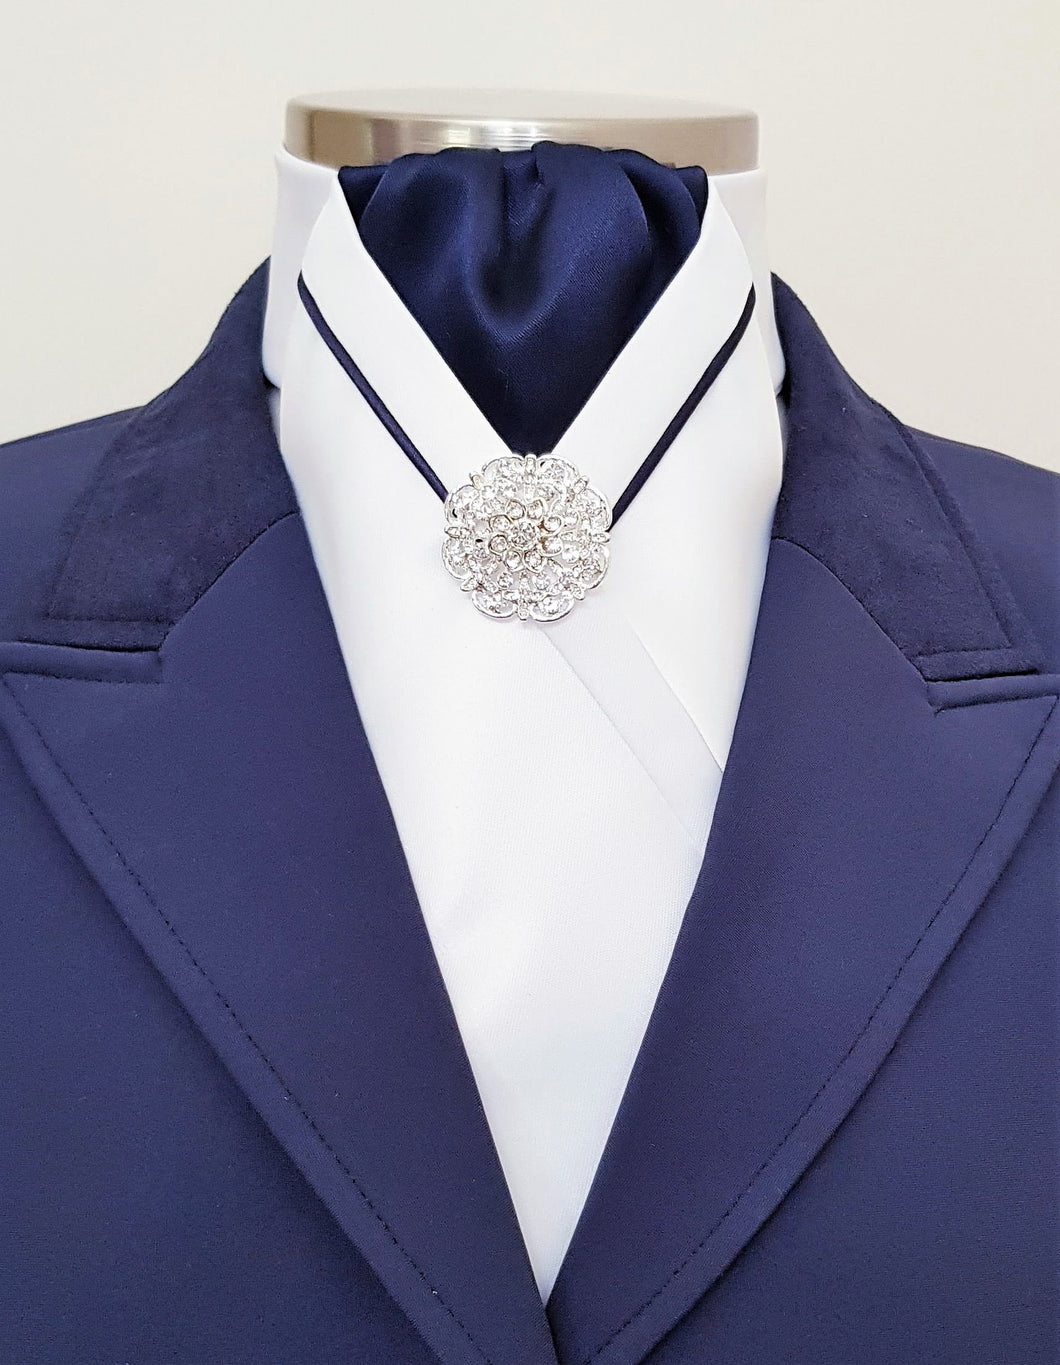 ERA KATE STOCK TIE - White satin, navy blue with navy V piping and brooch